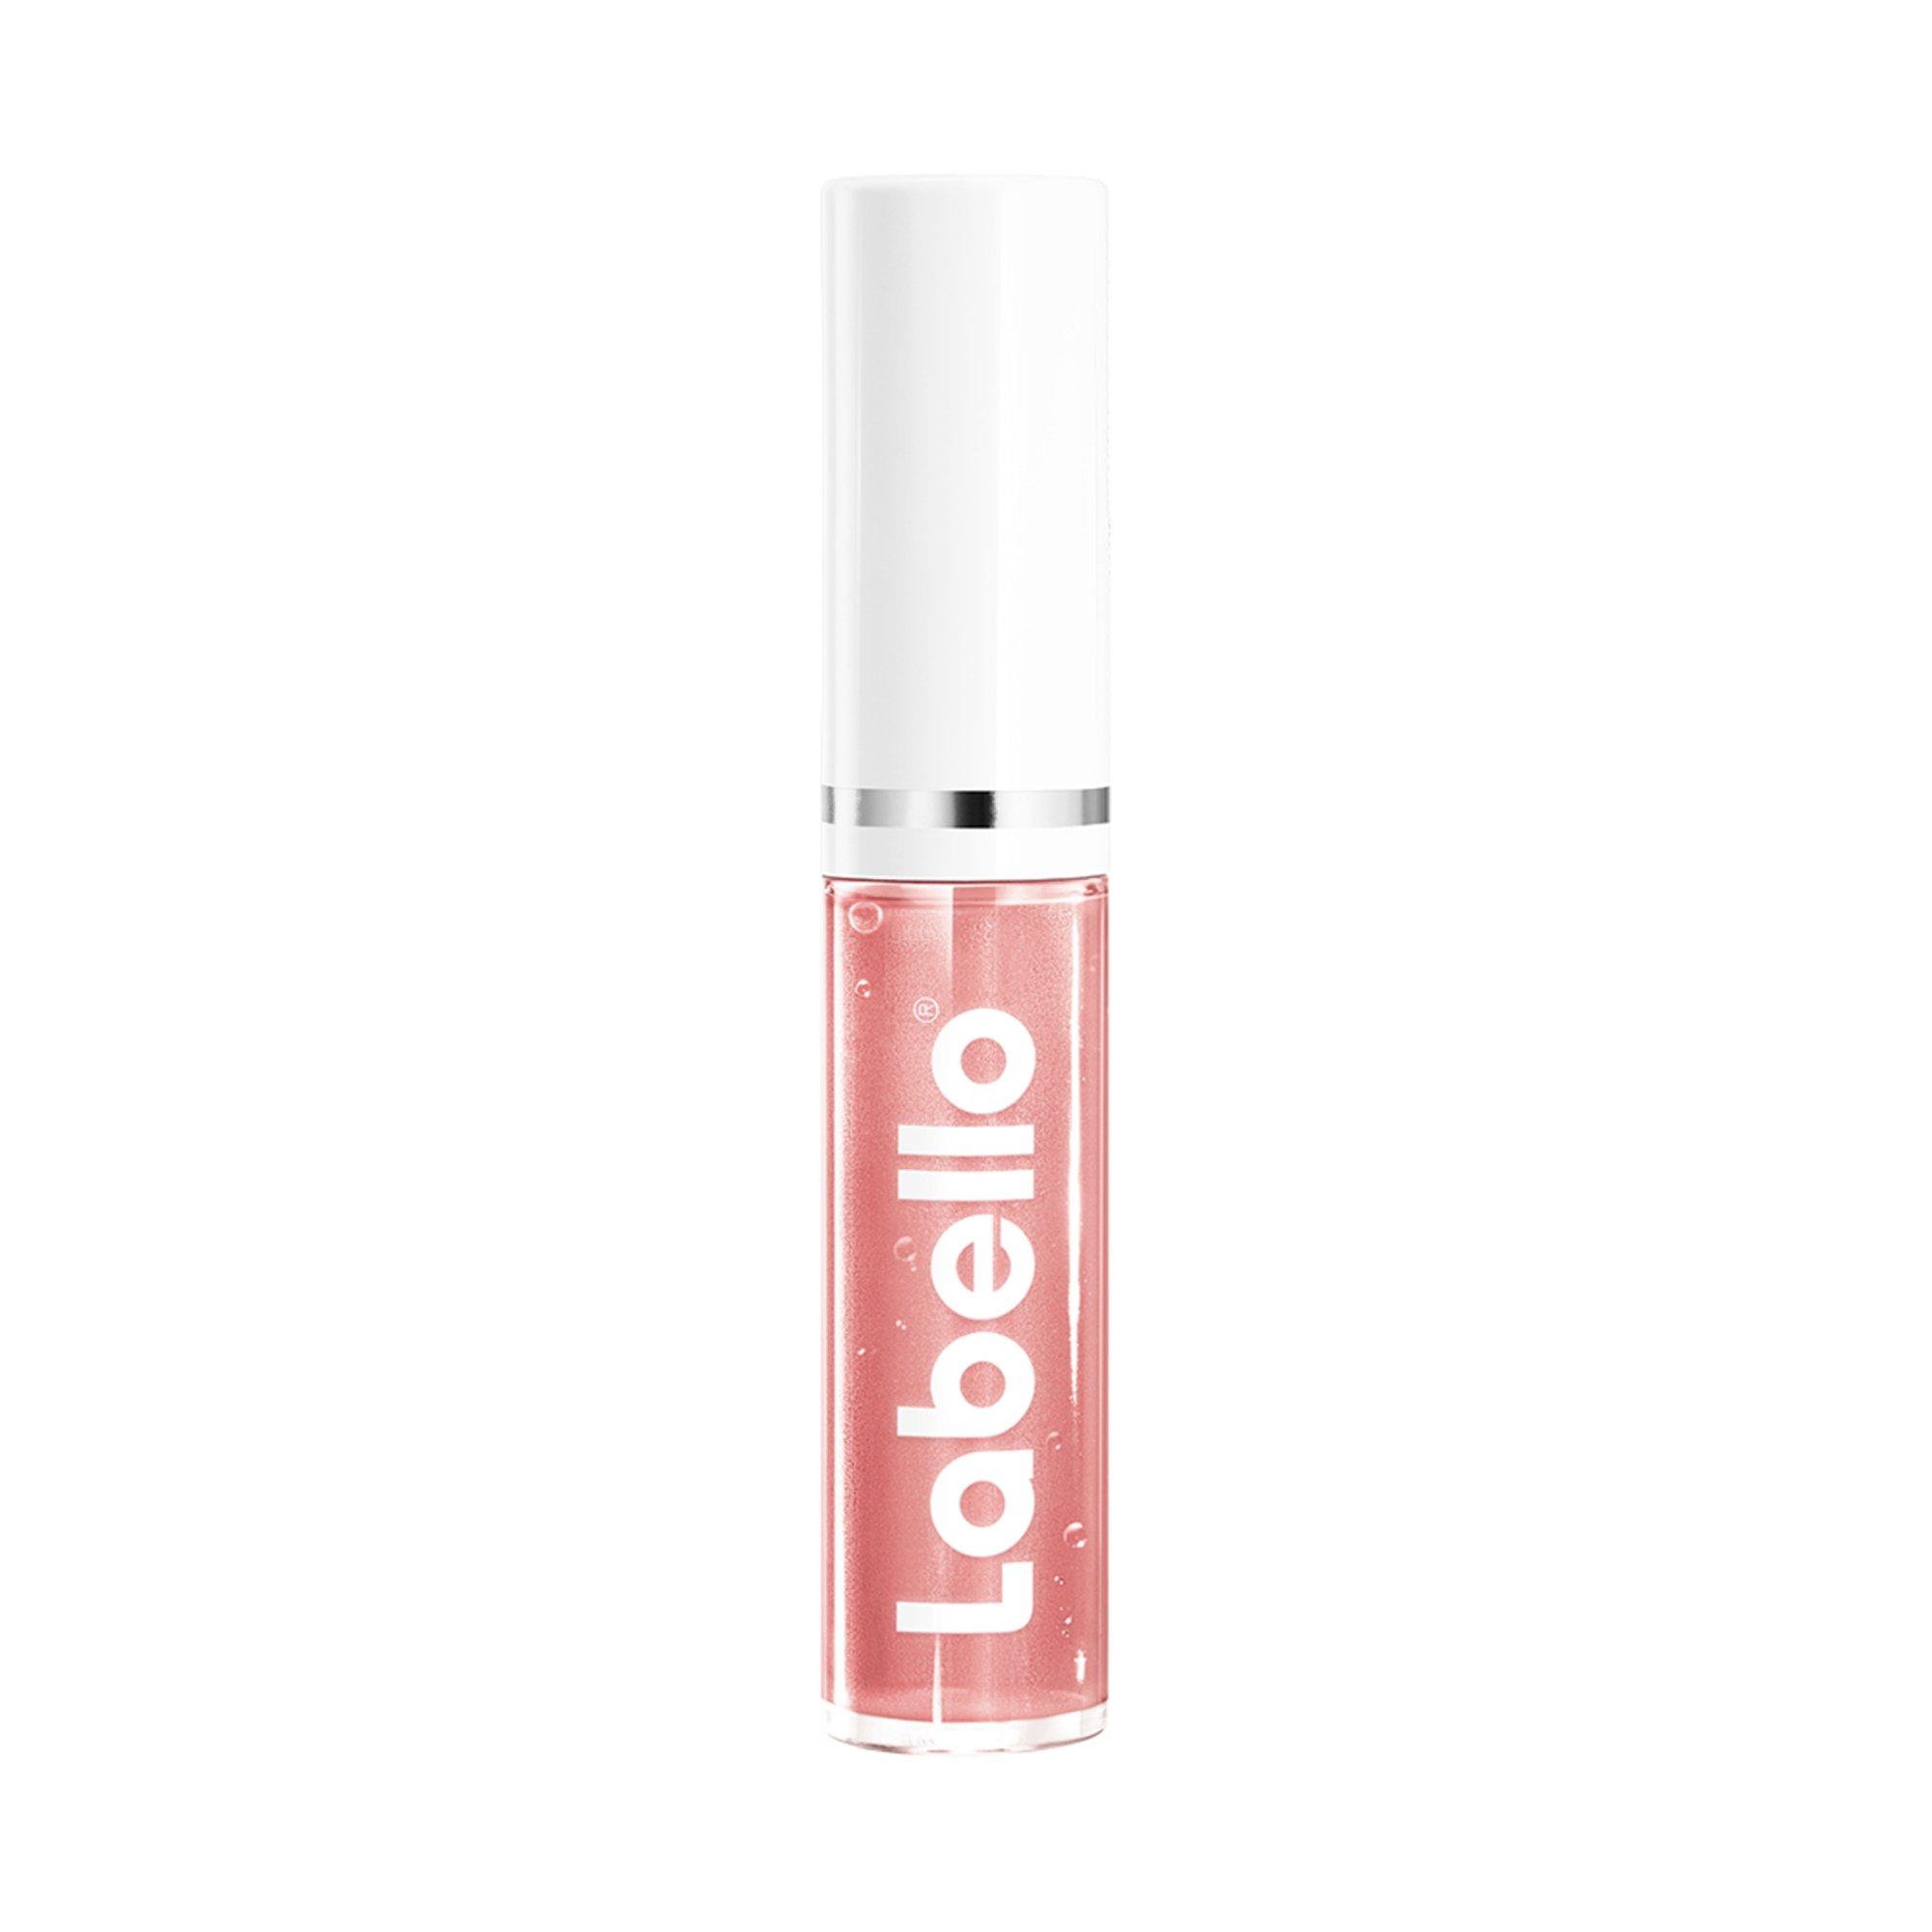 Image of labello Caring Rosé Caring Lip Gloss Rosé - 4.8g